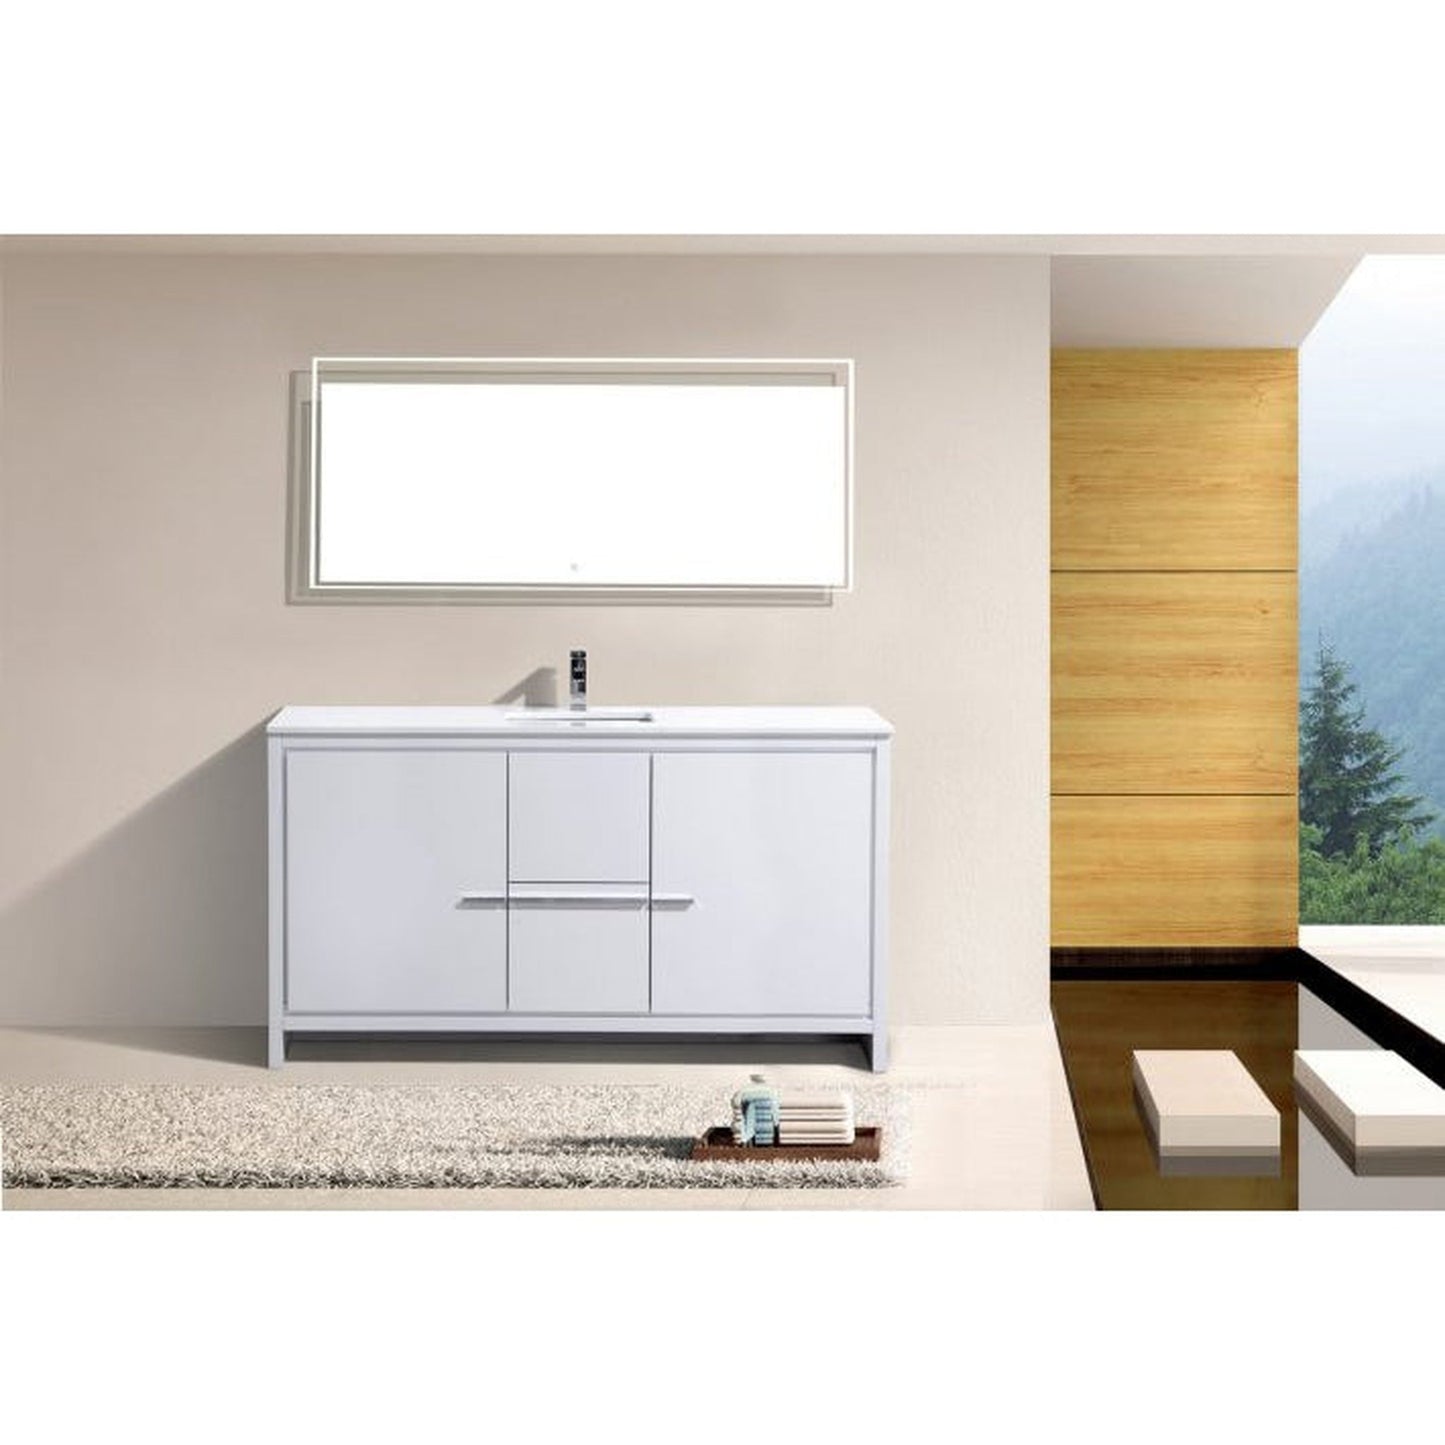 KubeBath Dolce 60" High Gloss White Freestanding Modern Bathroom Vanity With Quartz Vanity Top & Ceramic Sink With Overflow and 60" White Framed Mirror With Shelf